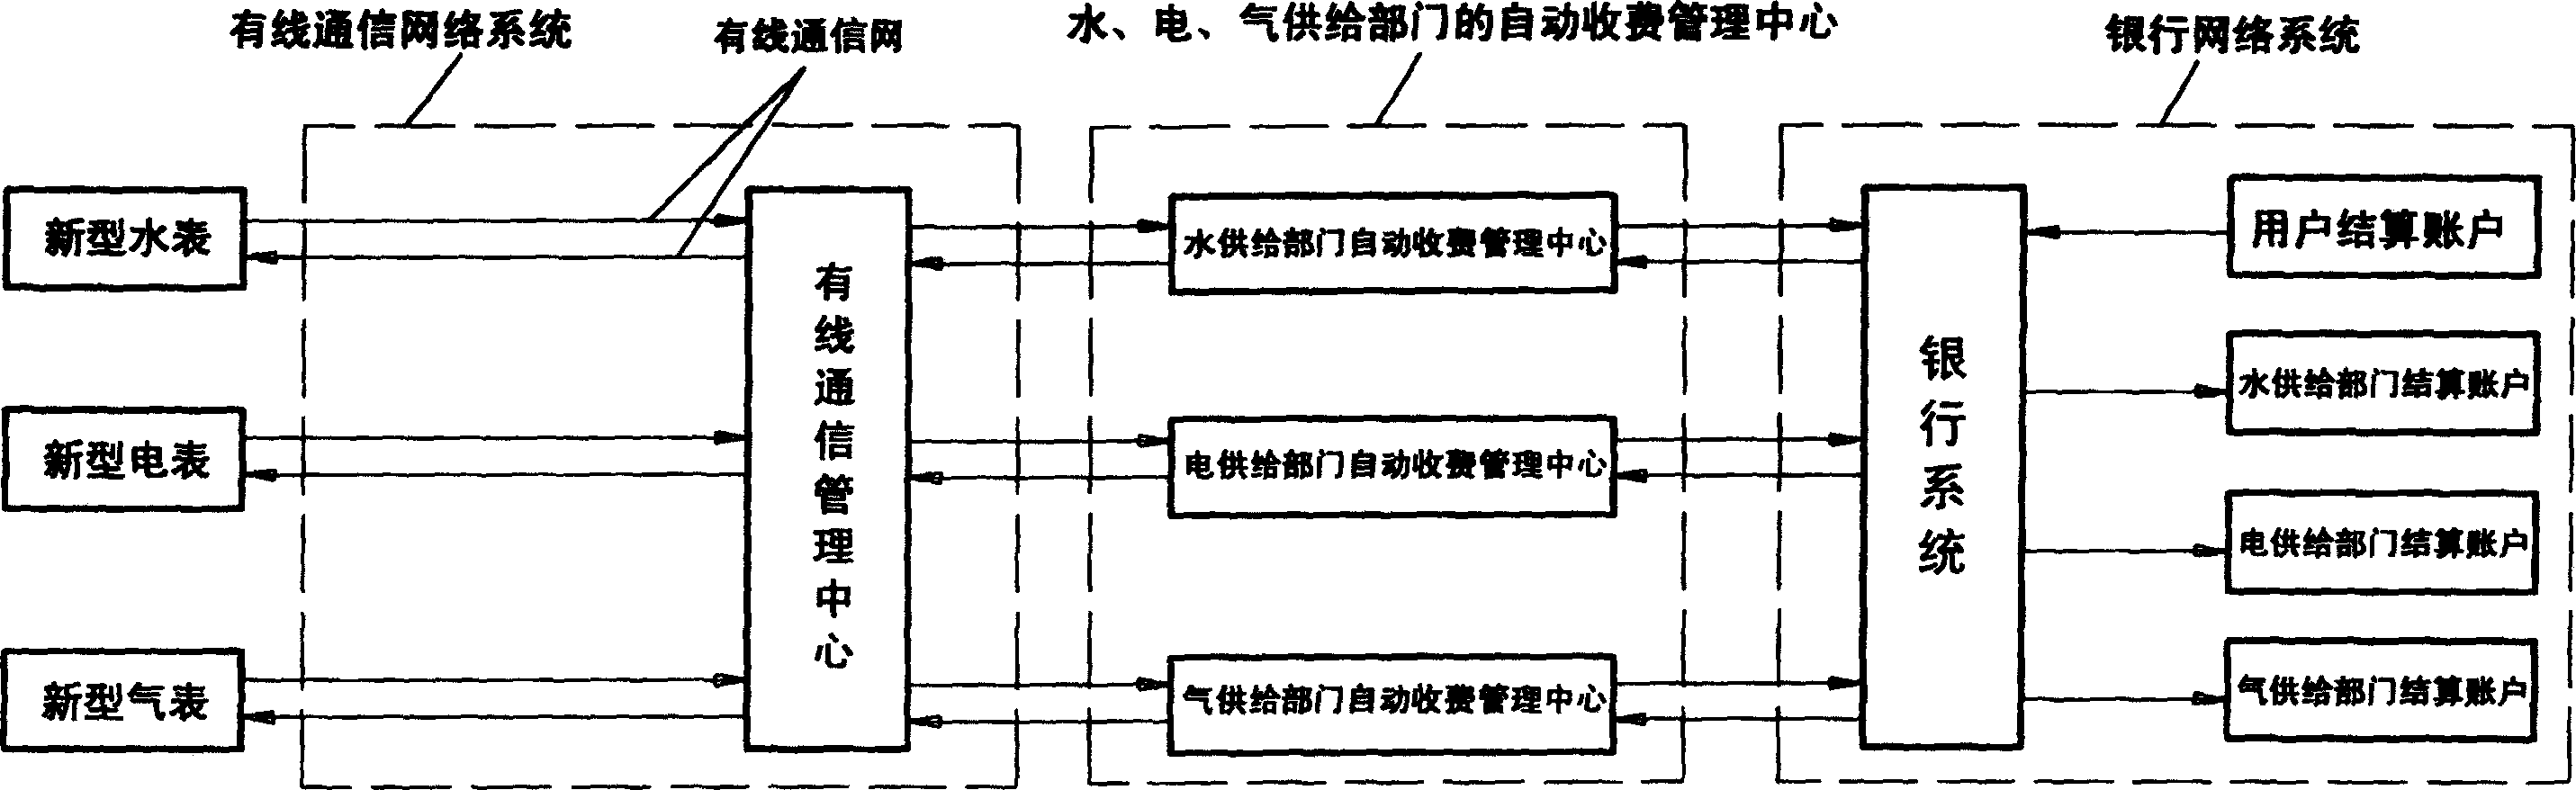 Remote automatic charging system and method for charging fees for water, electricity and gas